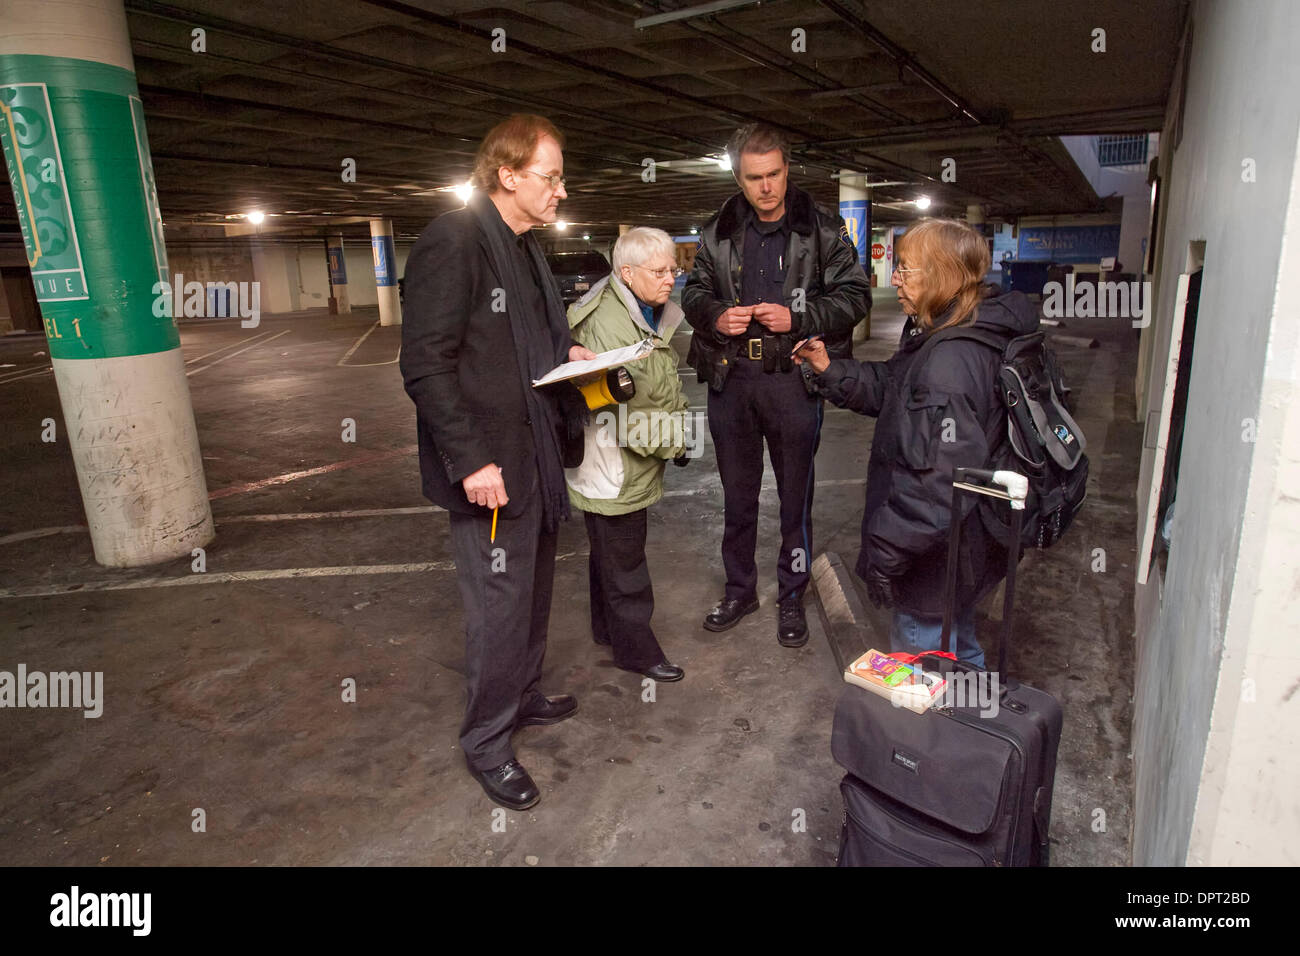 San Mateo County Supervisor's Mark Church, left, and Carole Groom along with San Mateo police officer Robert Anderson talk with Irene(does not want last name used) in a parking garage, in San Mateo,Calif., Thursday, January 29, 2009. Volunteers and county officials conducted a count of the homeless in the city early Thursday morning..(John Green/Staff) Stock Photo